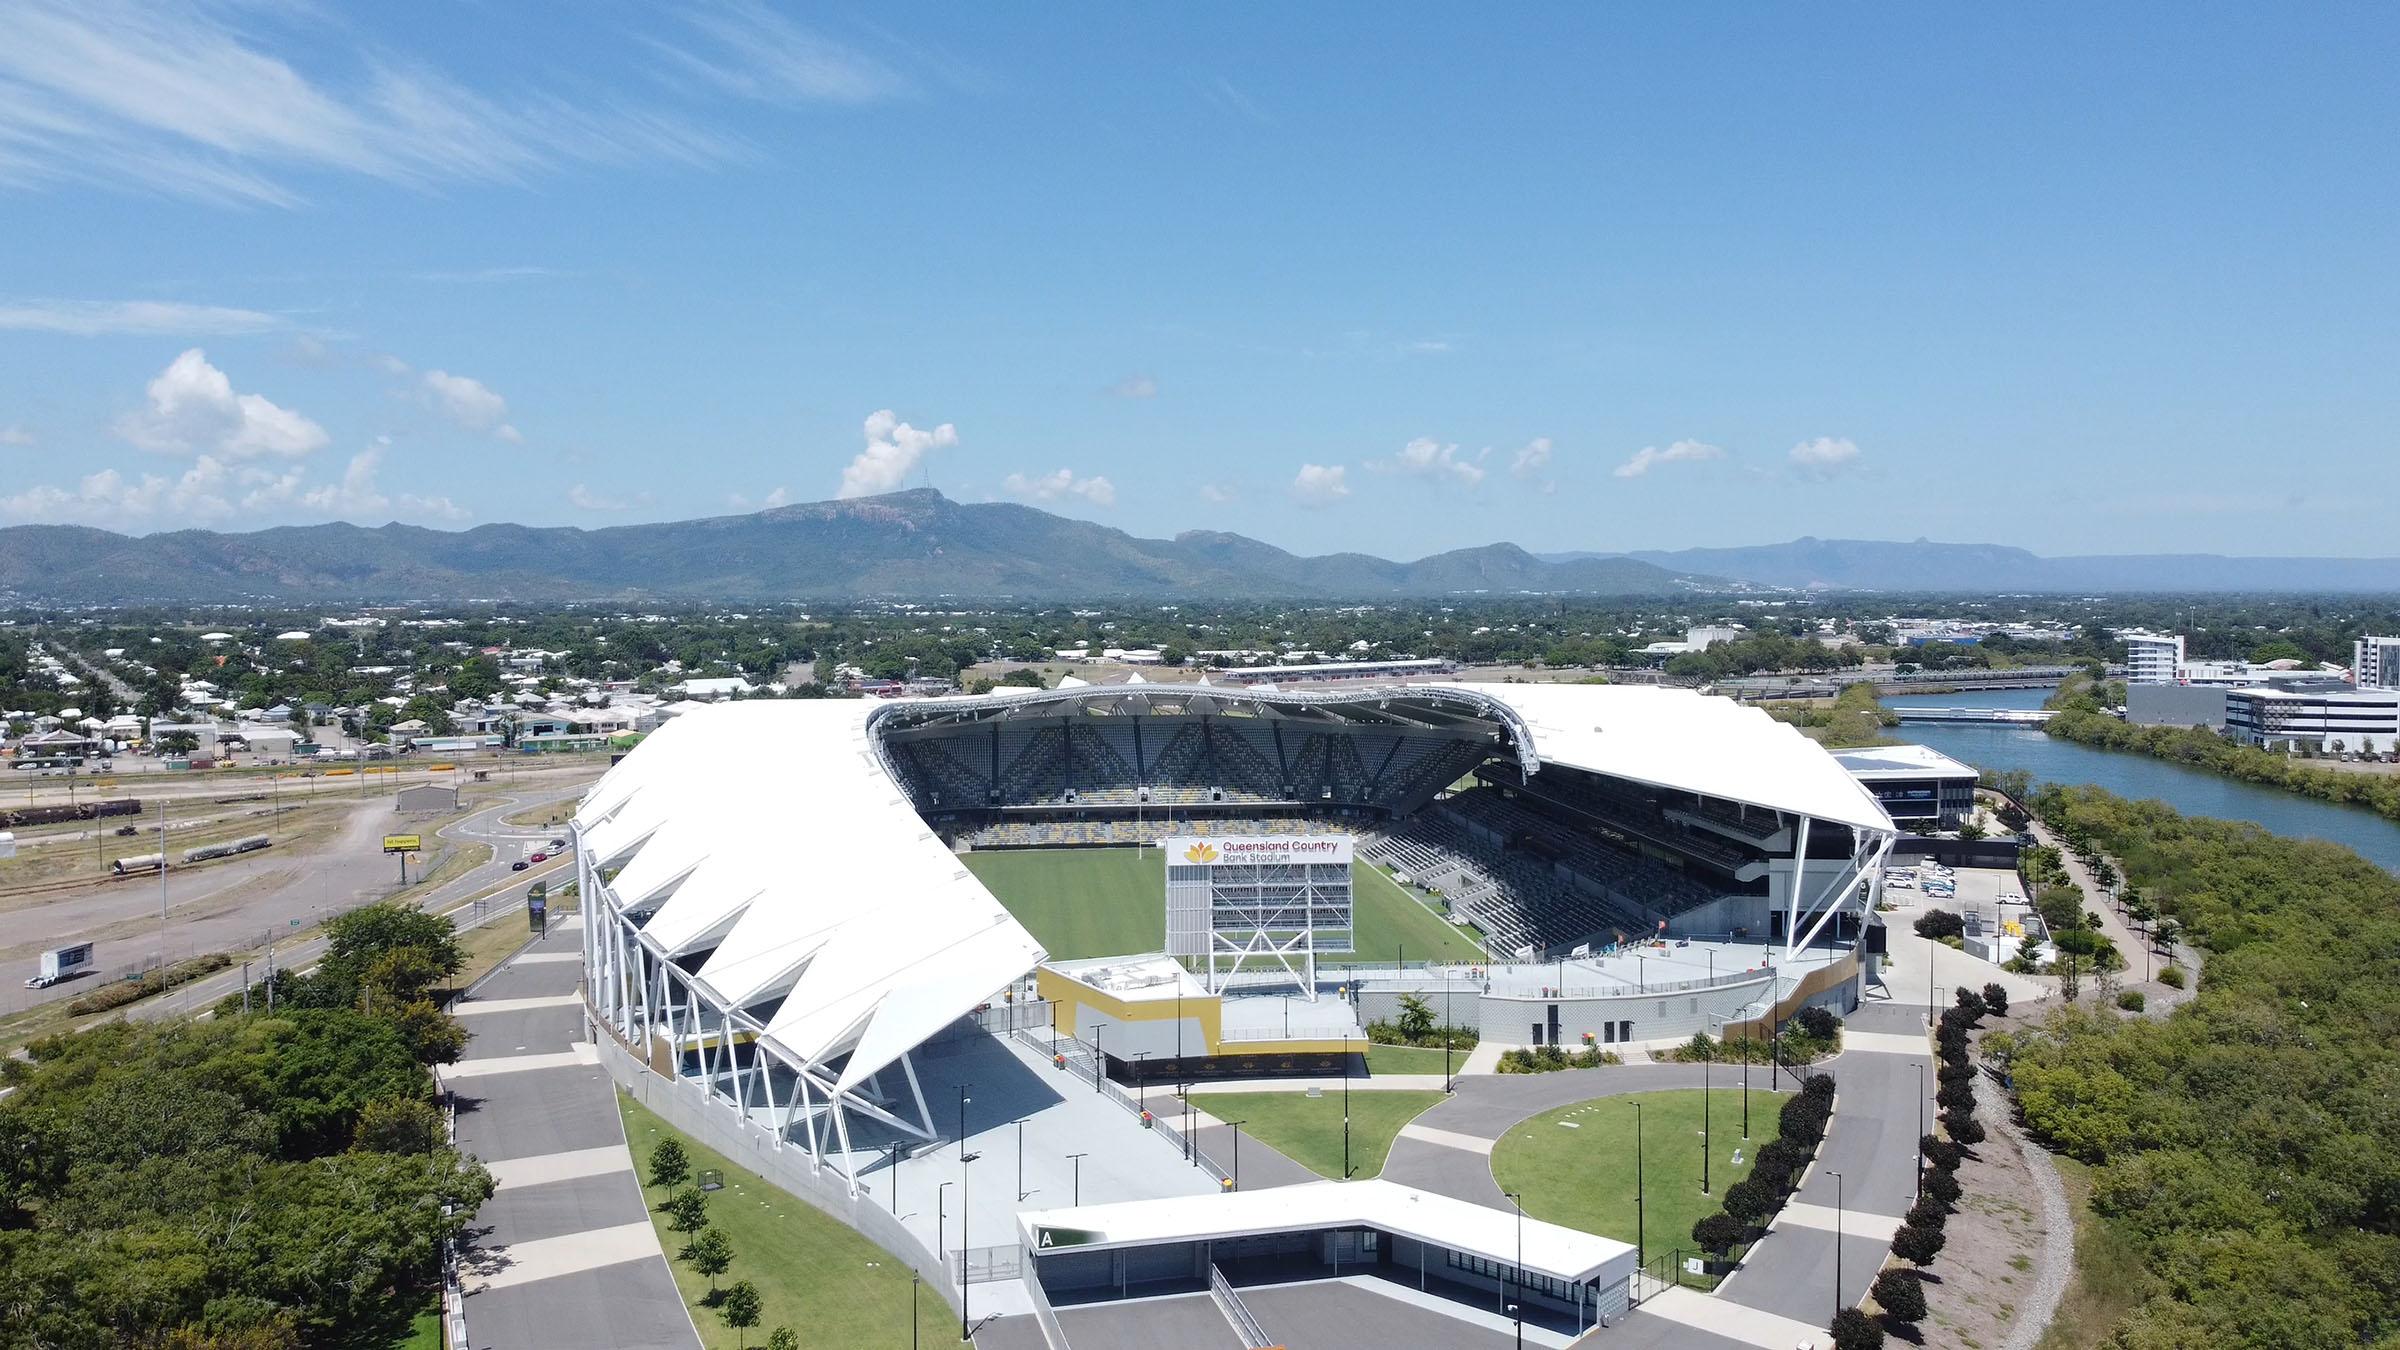 Aerial view of Queensland Country Bank Stadium next to river